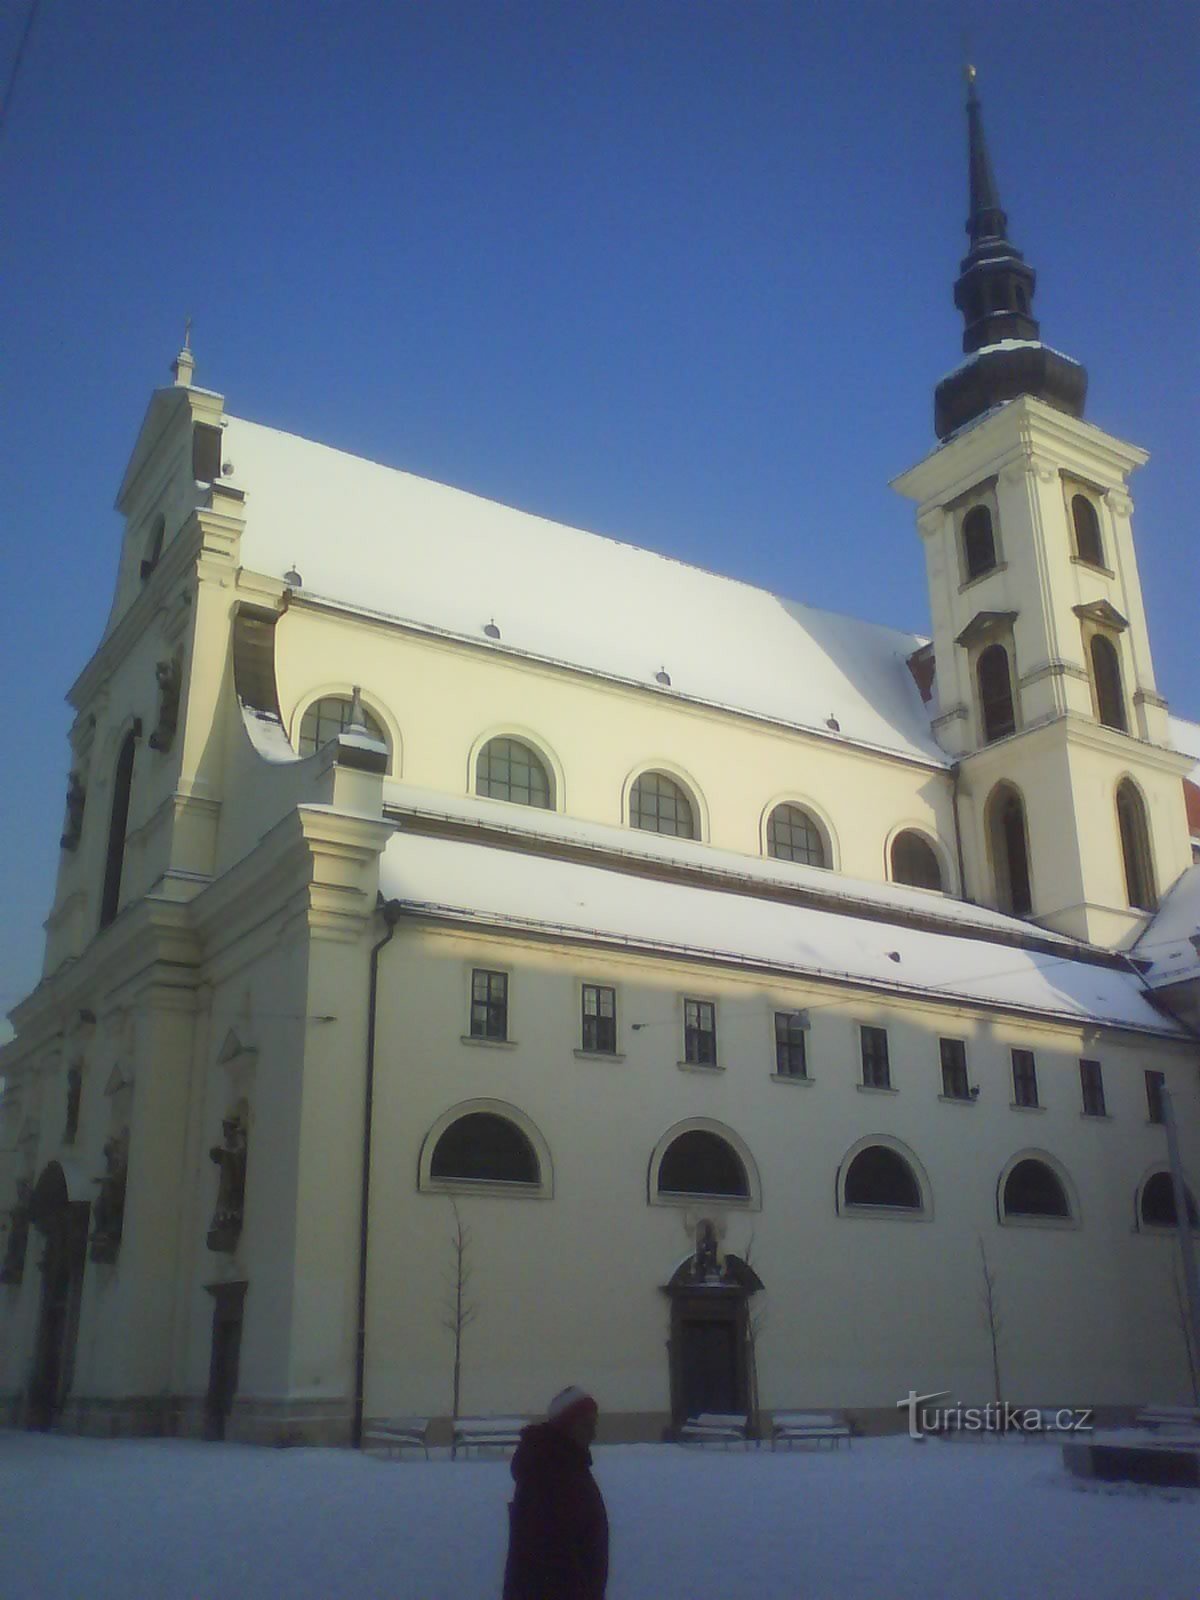 Church of St. Tomas in Brno